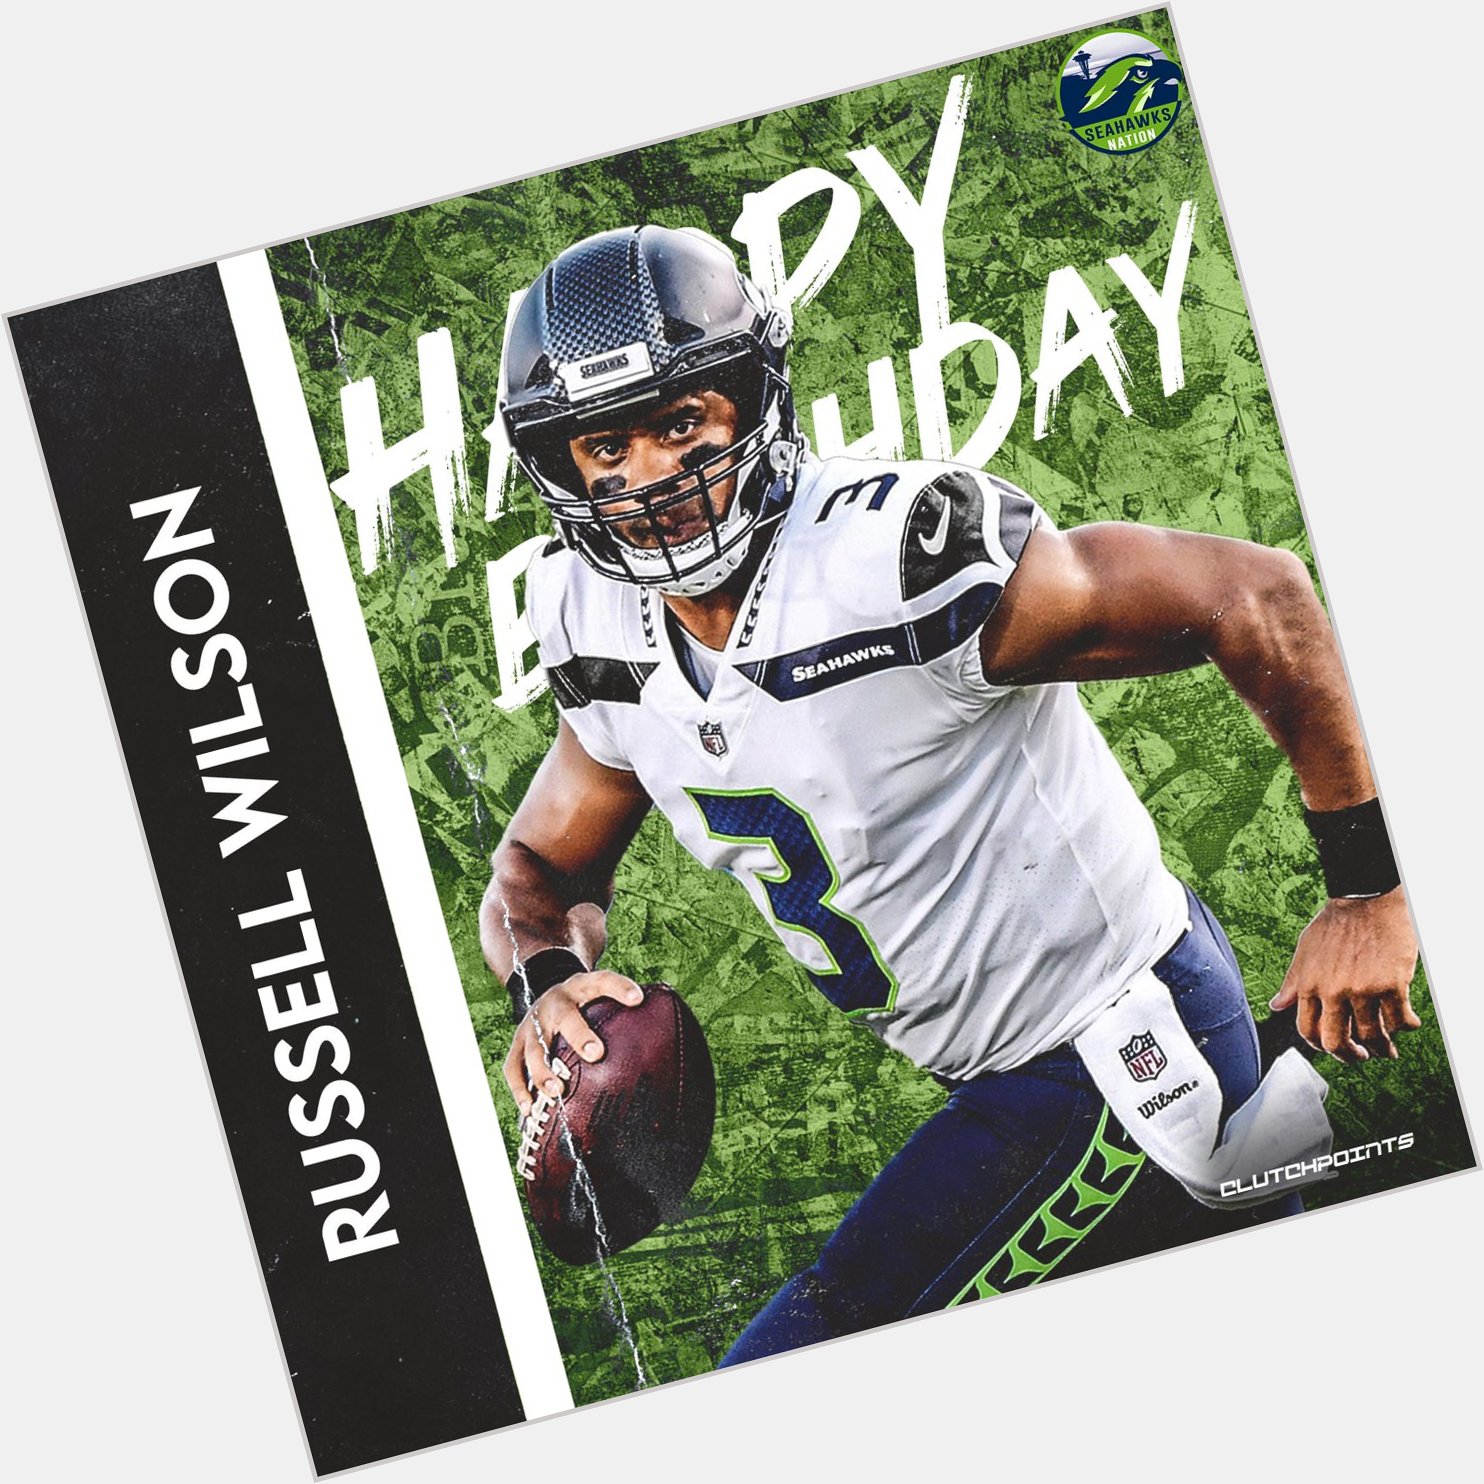 Join us, Seahawks Nation as we greet our All-Star Quarterback Russell Wilson a happy 33rd birthday! 